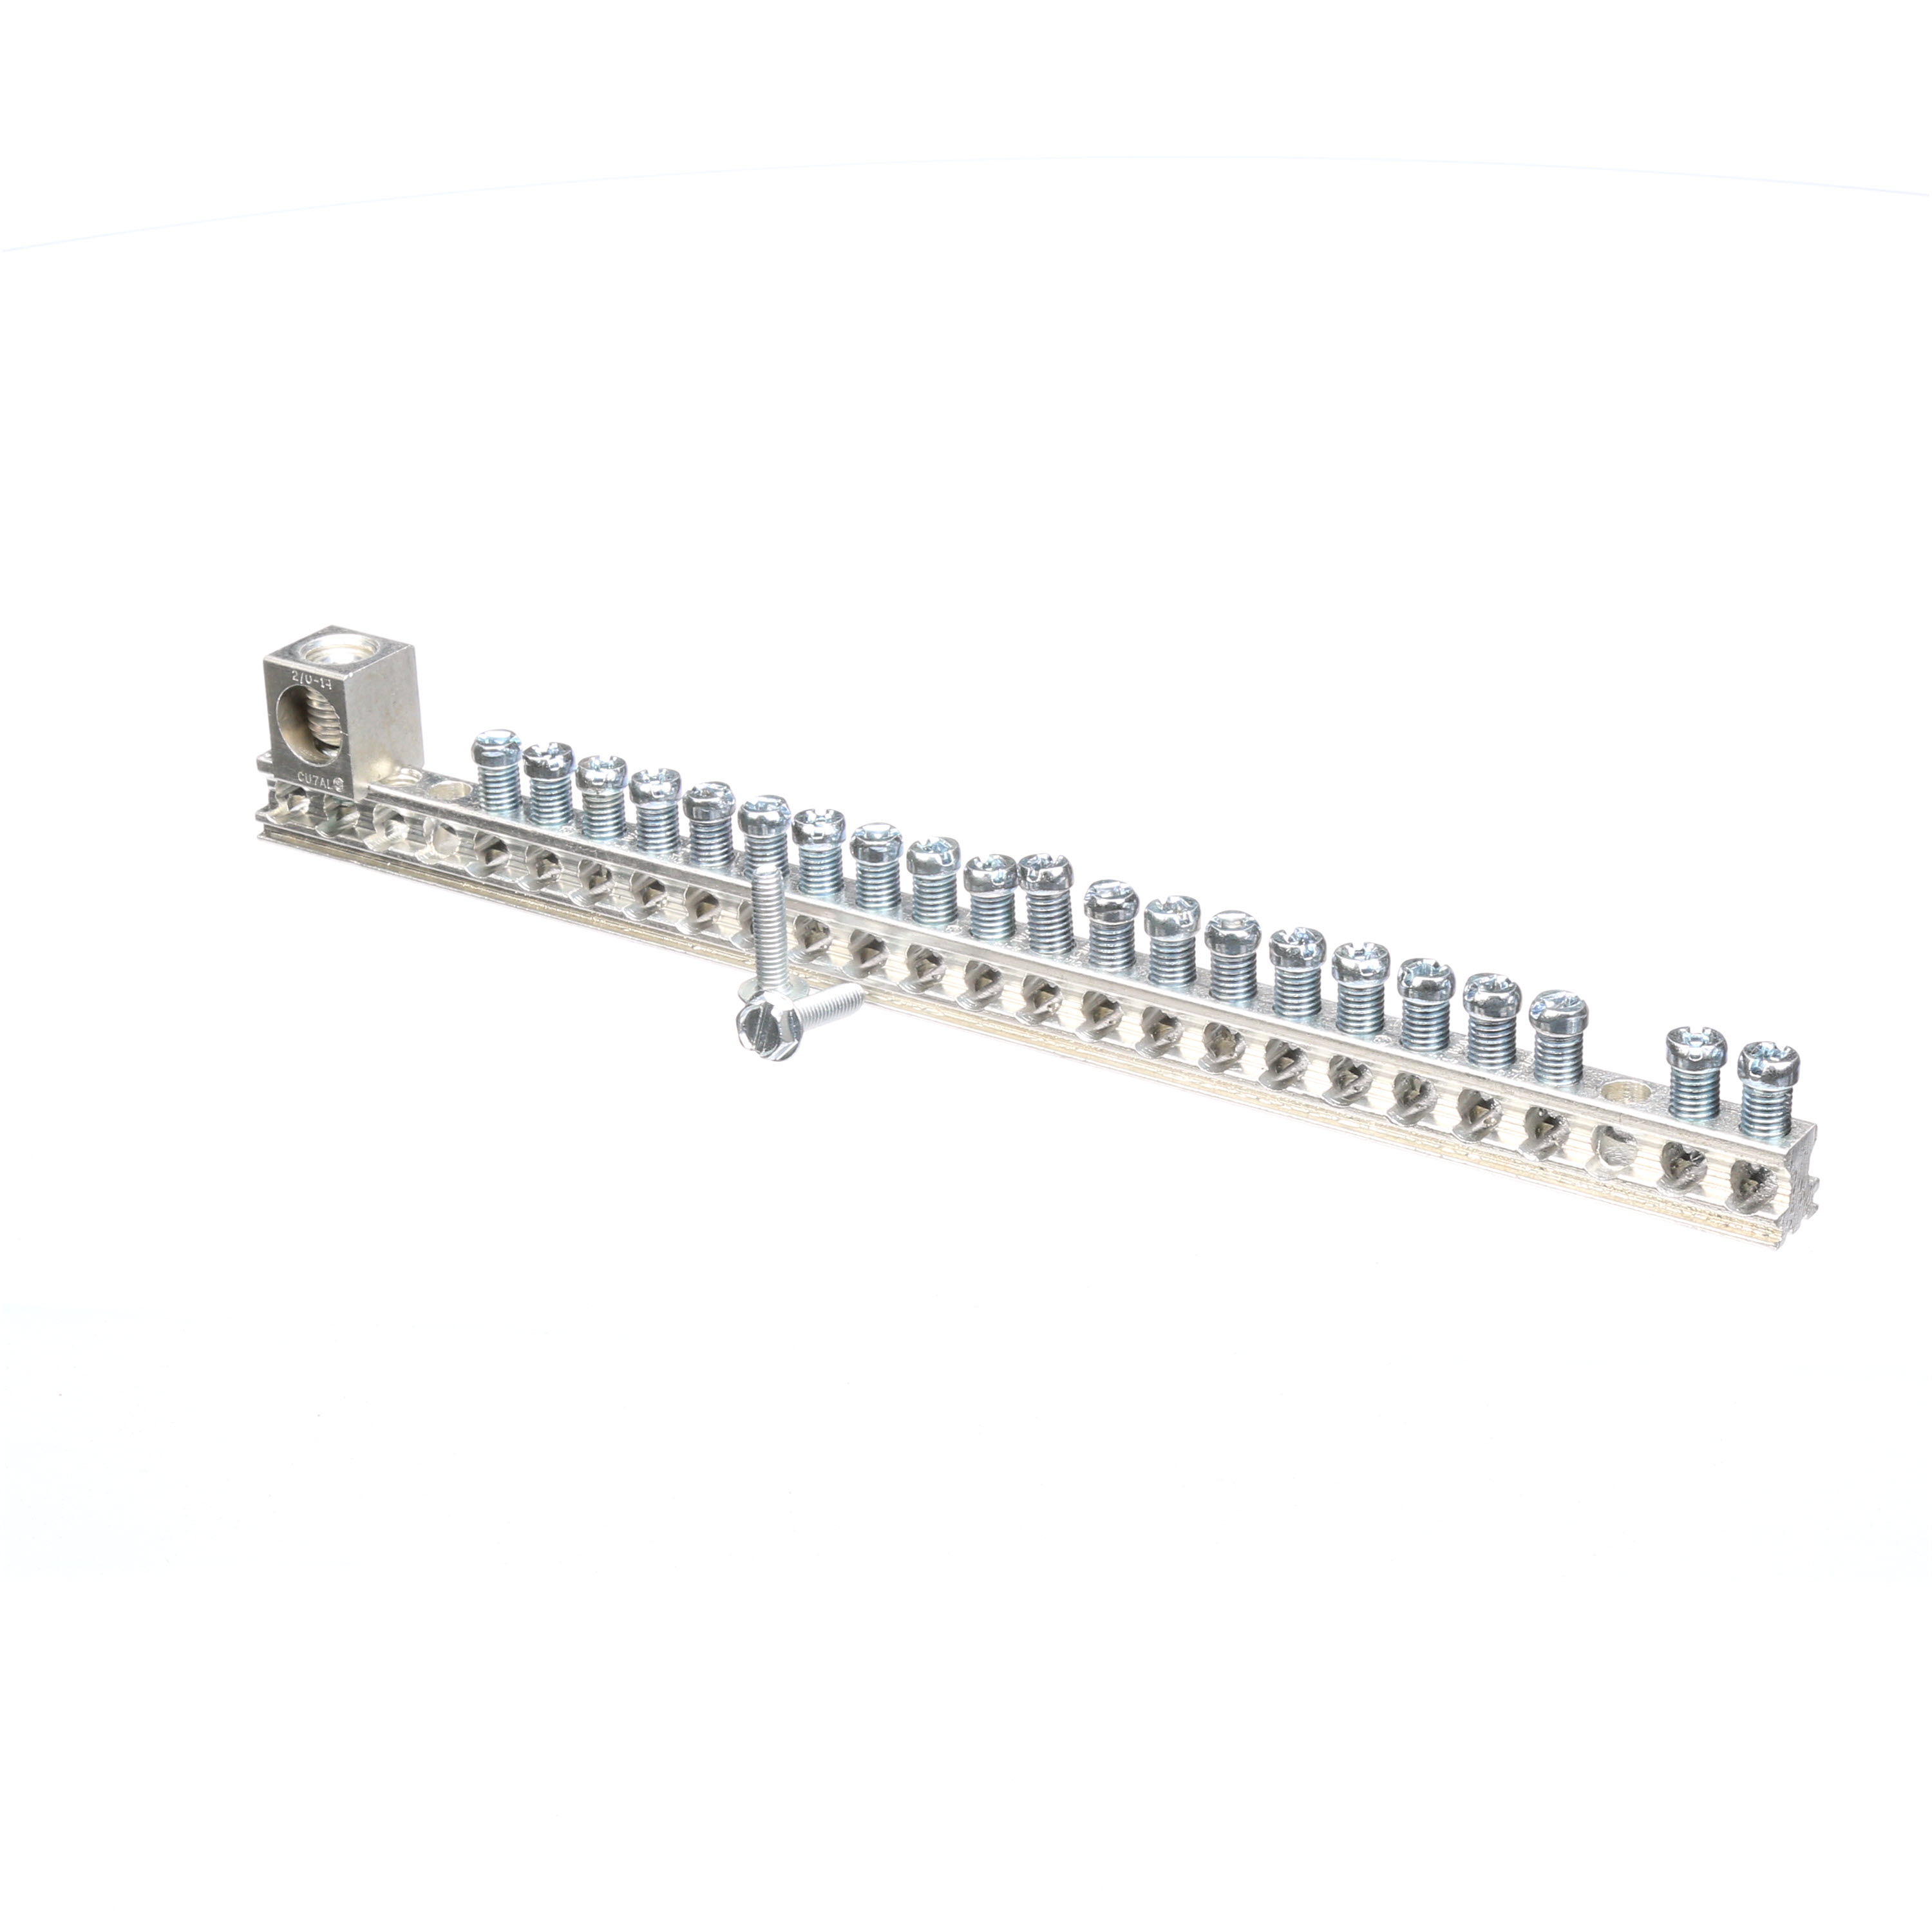 Siemens Low Voltage Residential Specialty Load Centers Ground Bar Kits for ES and PL load centers. 21 positions with 2/0 lug.